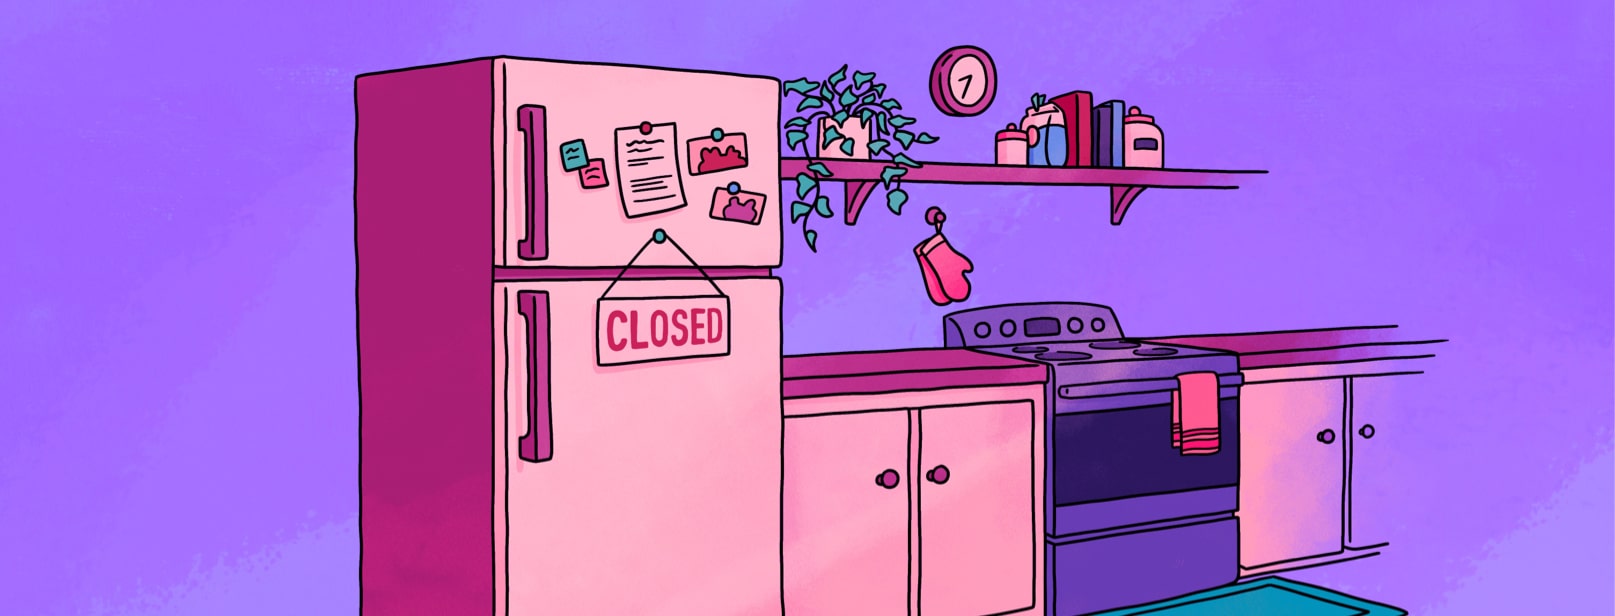 A kitchen at nighttime with a closed sign on the refrigerator